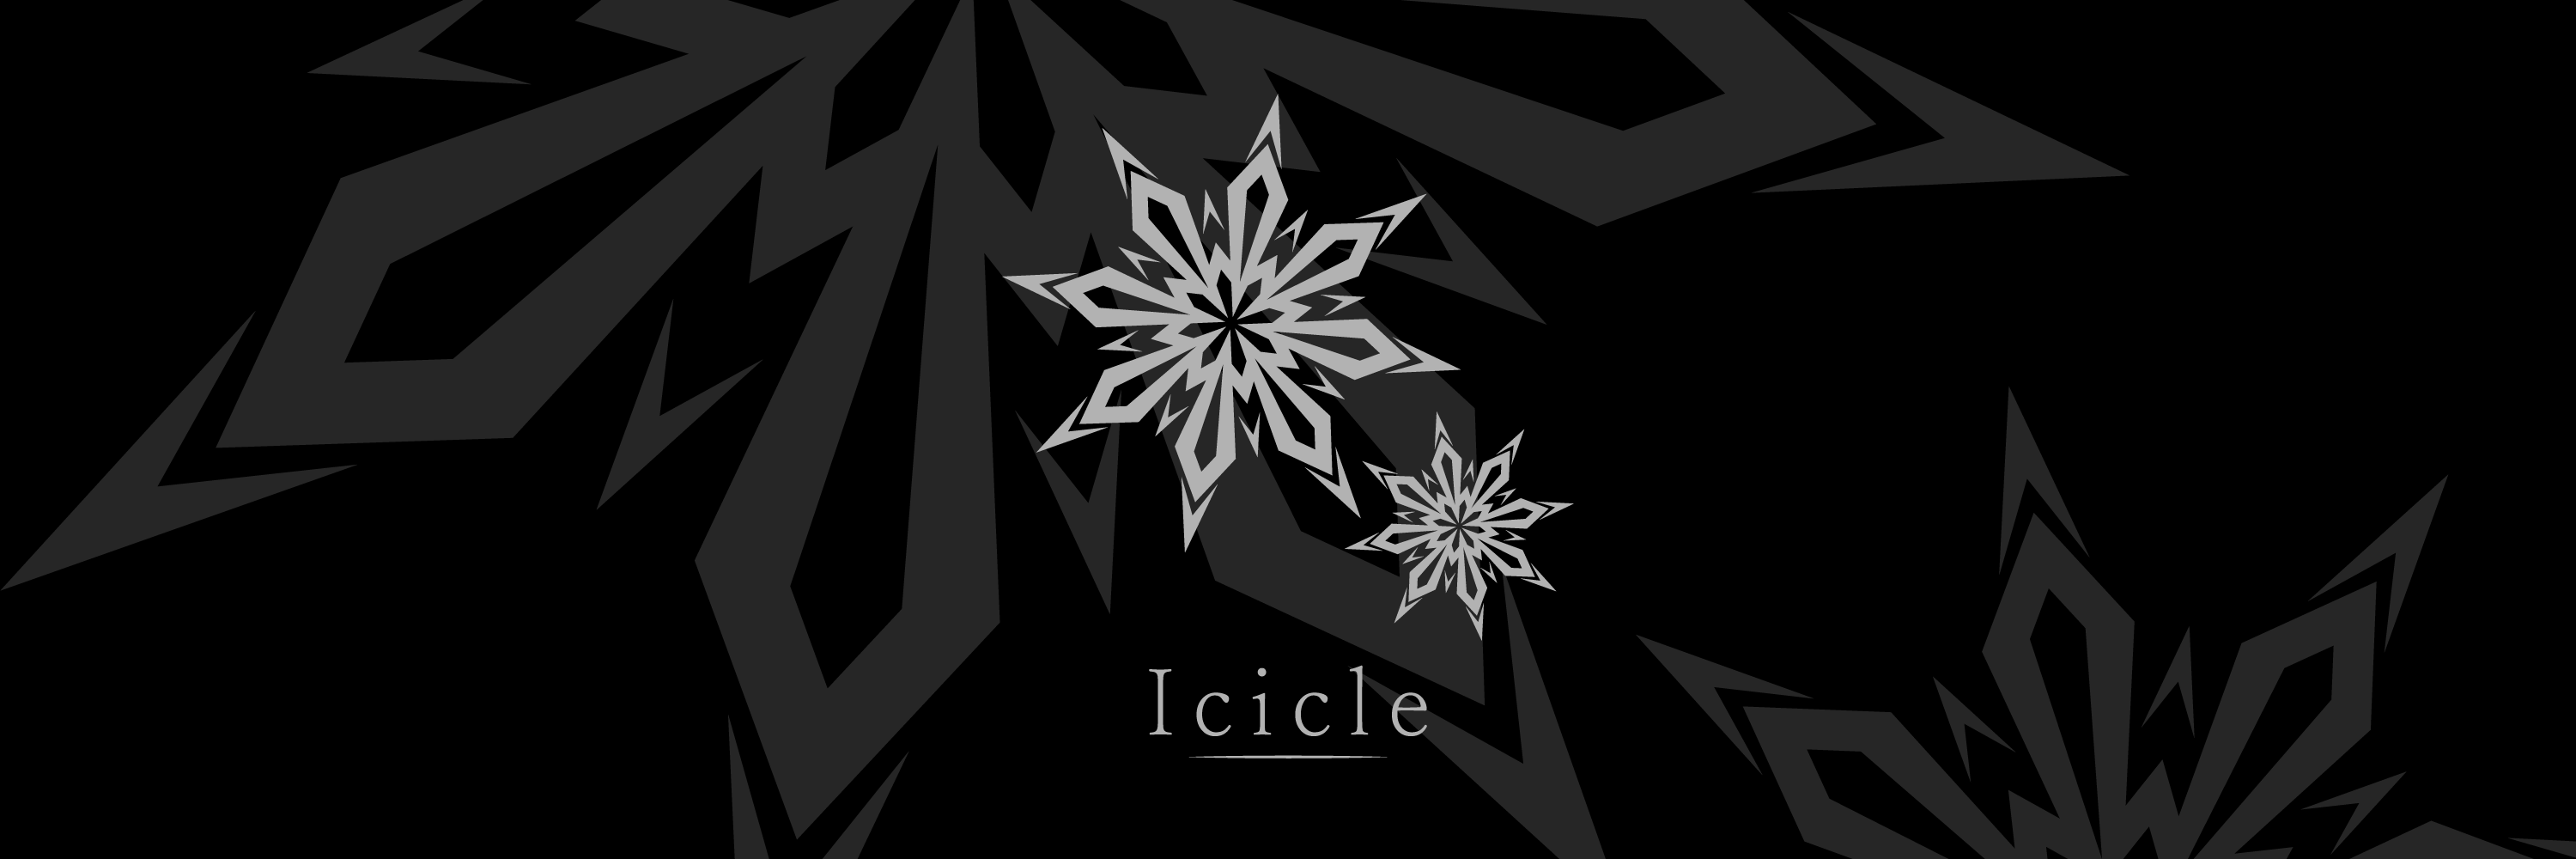 teamicicle